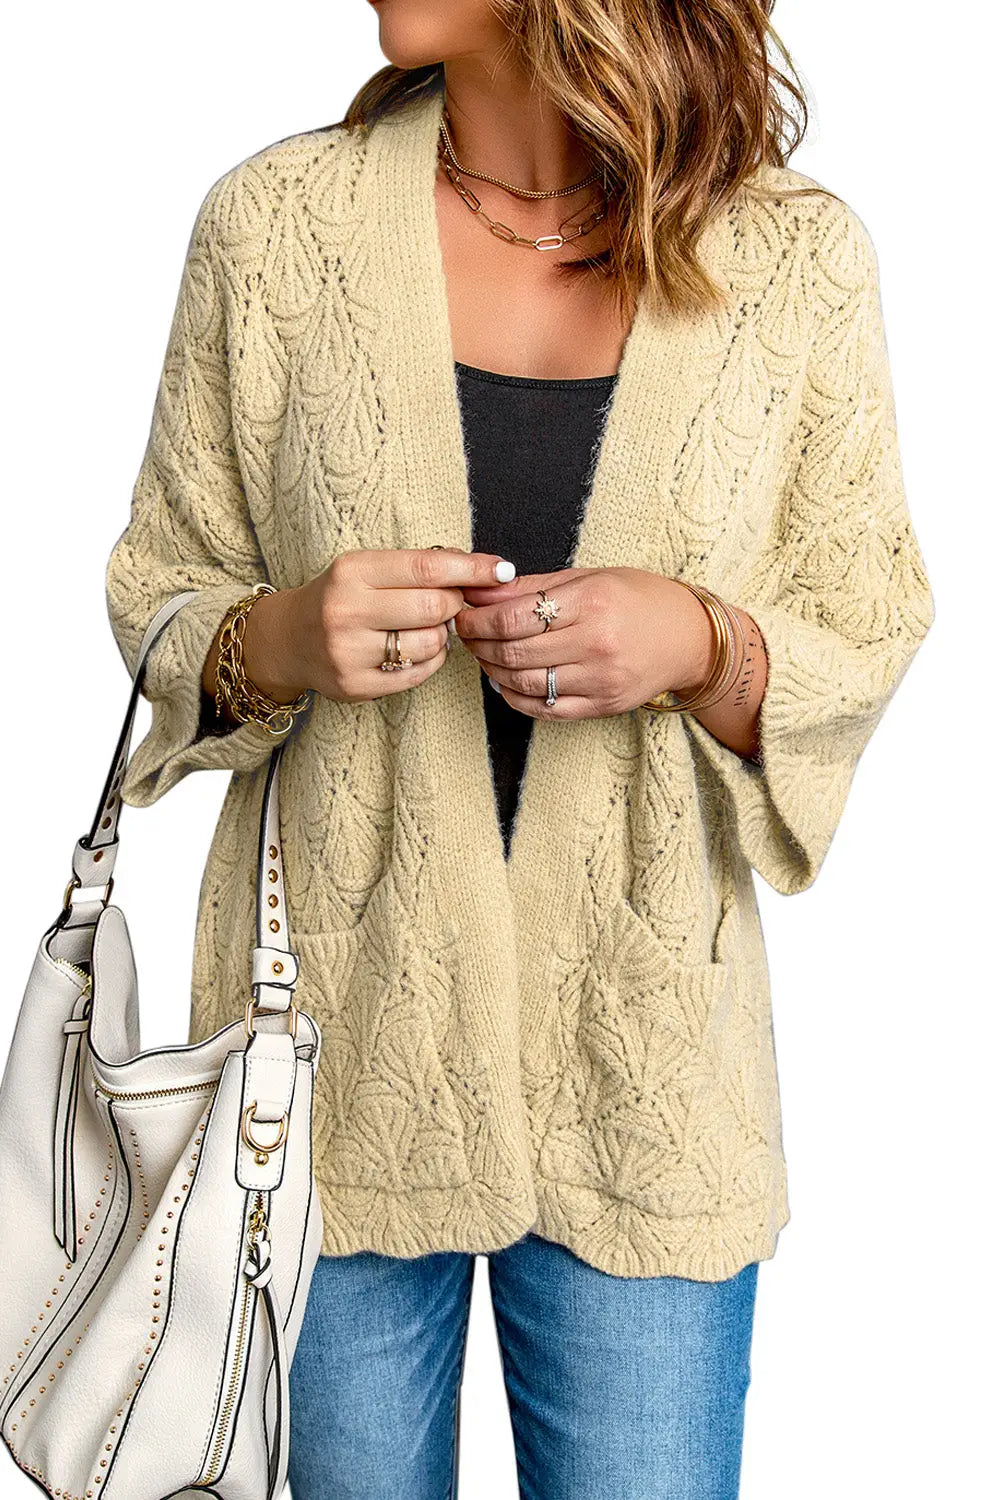 Khaki textured pocket knit open front cardigan - sweaters & cardigans